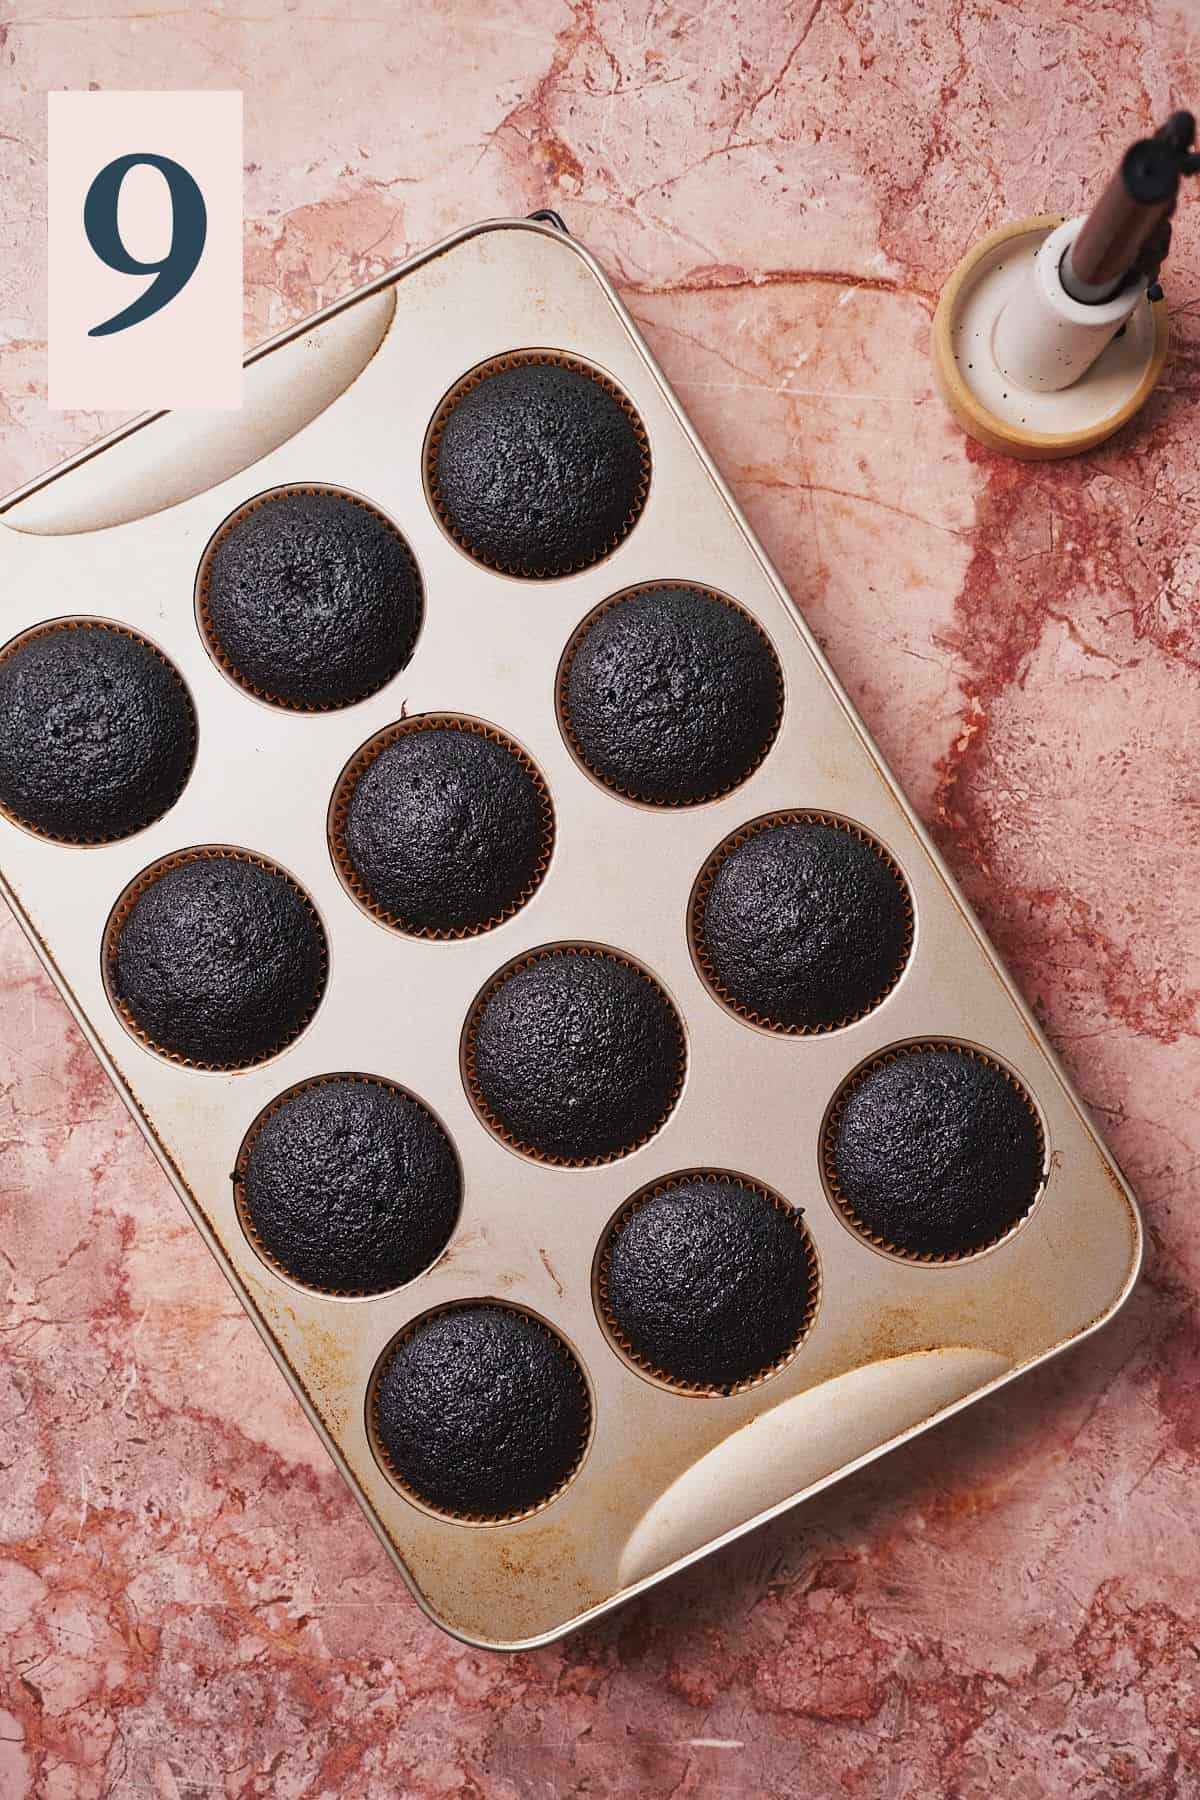 12 dark black cupcakes baked in a tin. 